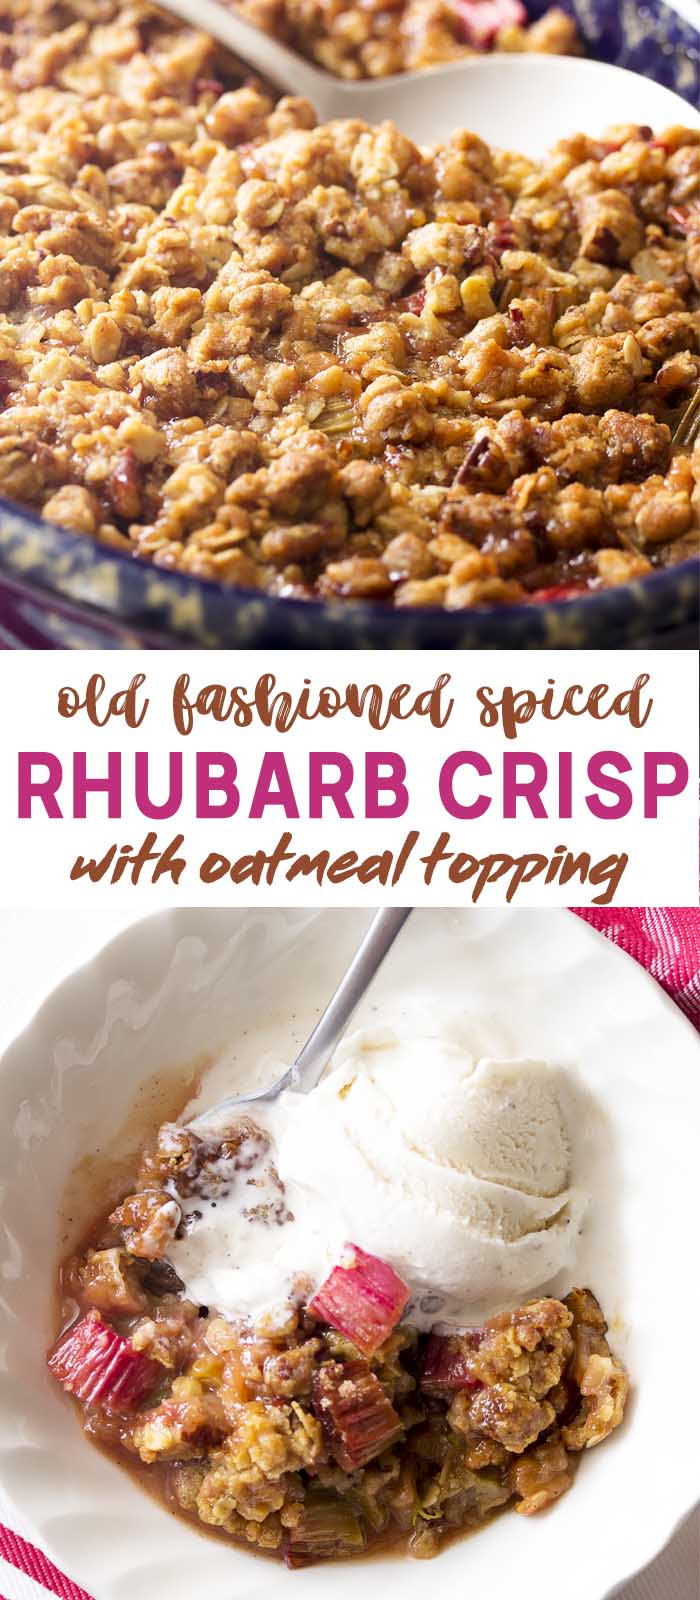 Rhubarb crisp in a baking dish and bowl with text overlay - Old Fashioned Spiced Rhubarb Crisp.